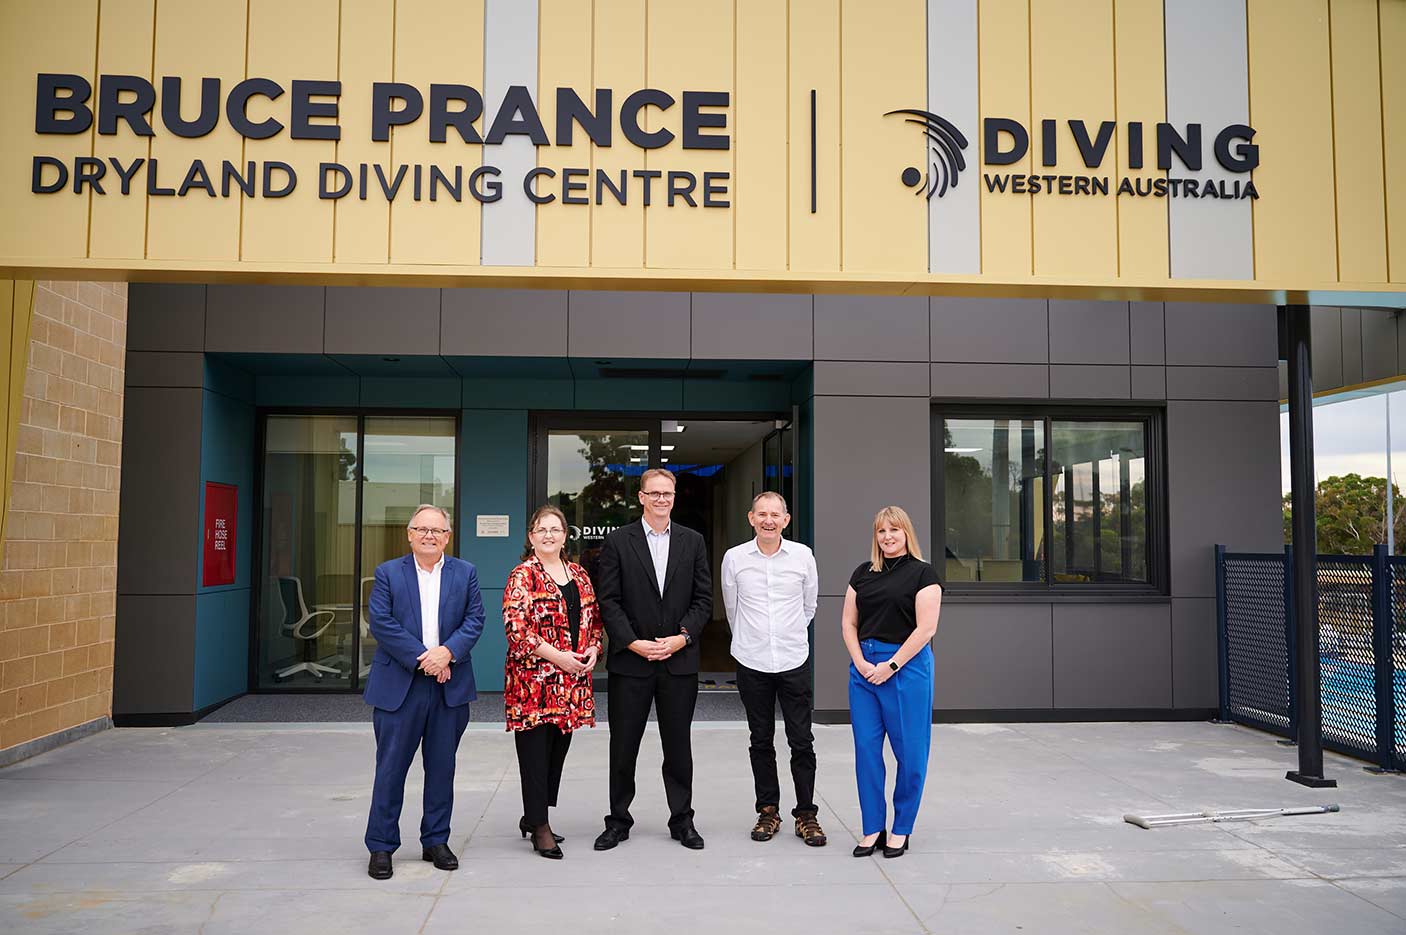 5 people standing in front of the Bruce Prance Dryland Diving Centre.